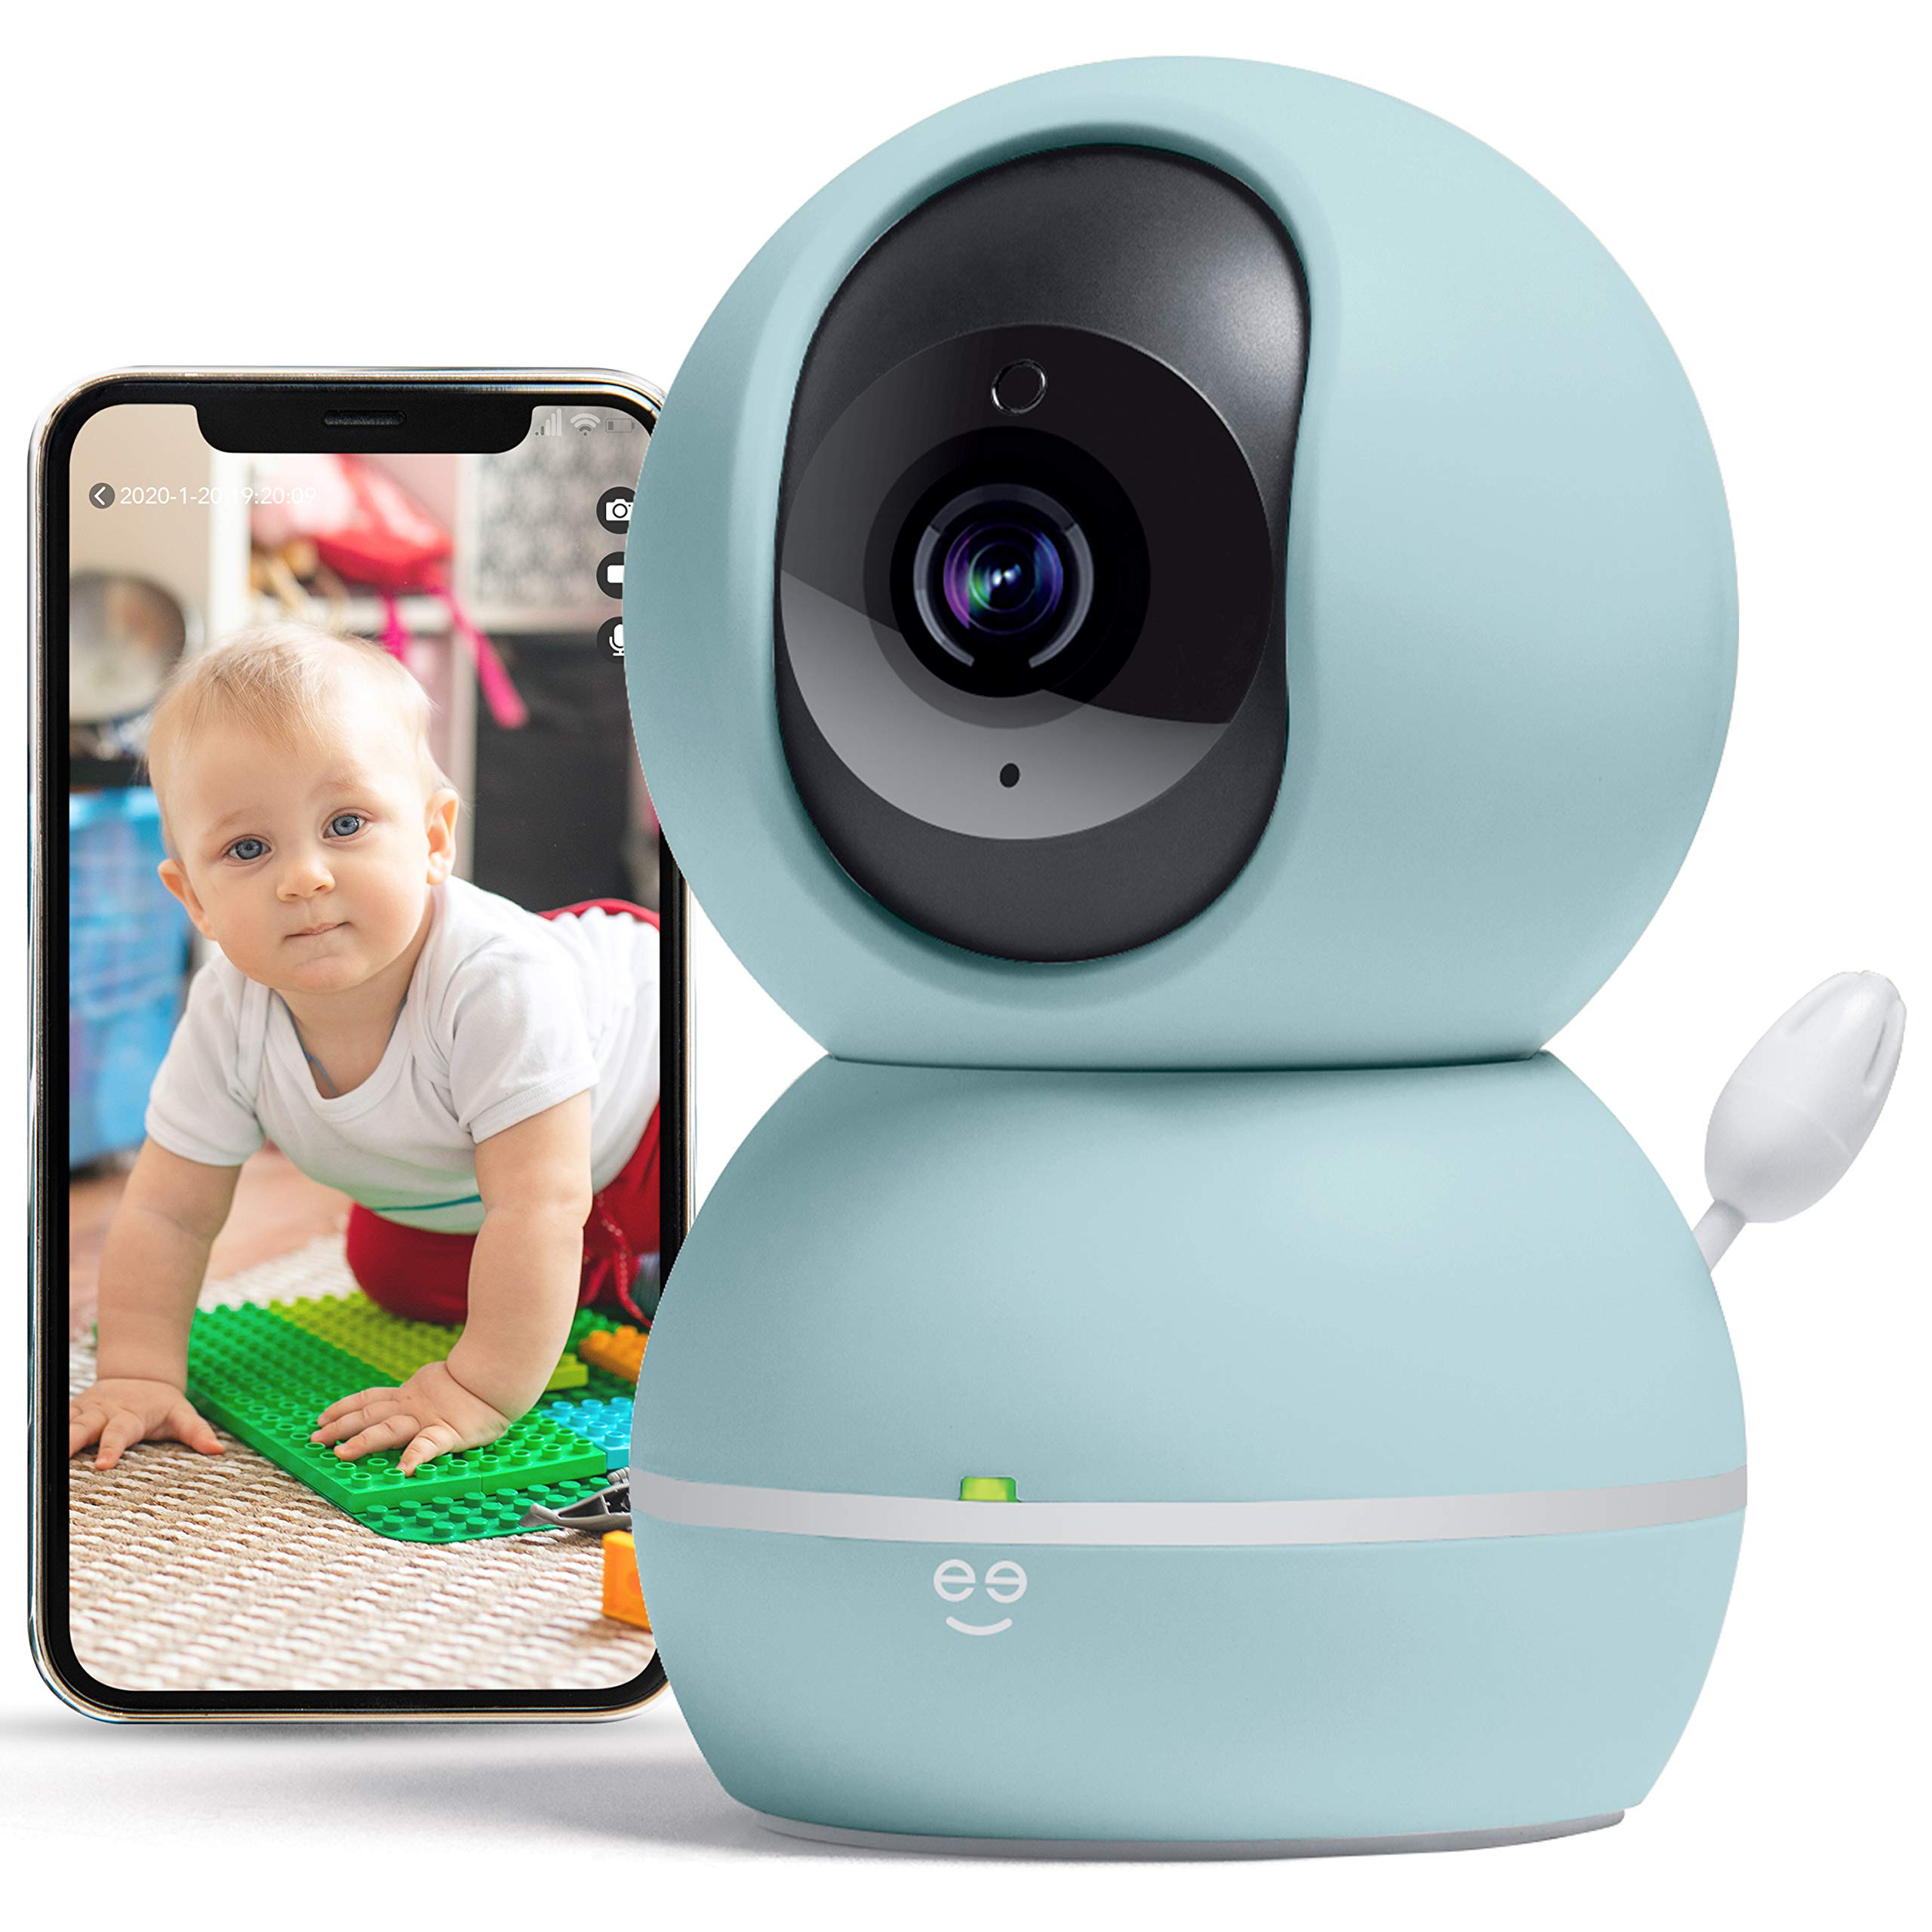 Geeni Smart Home Pet and Baby Monitor with Camera, 1080p Wireless WiFi Camera with Motion and Sound Alert (Pastel Blue)